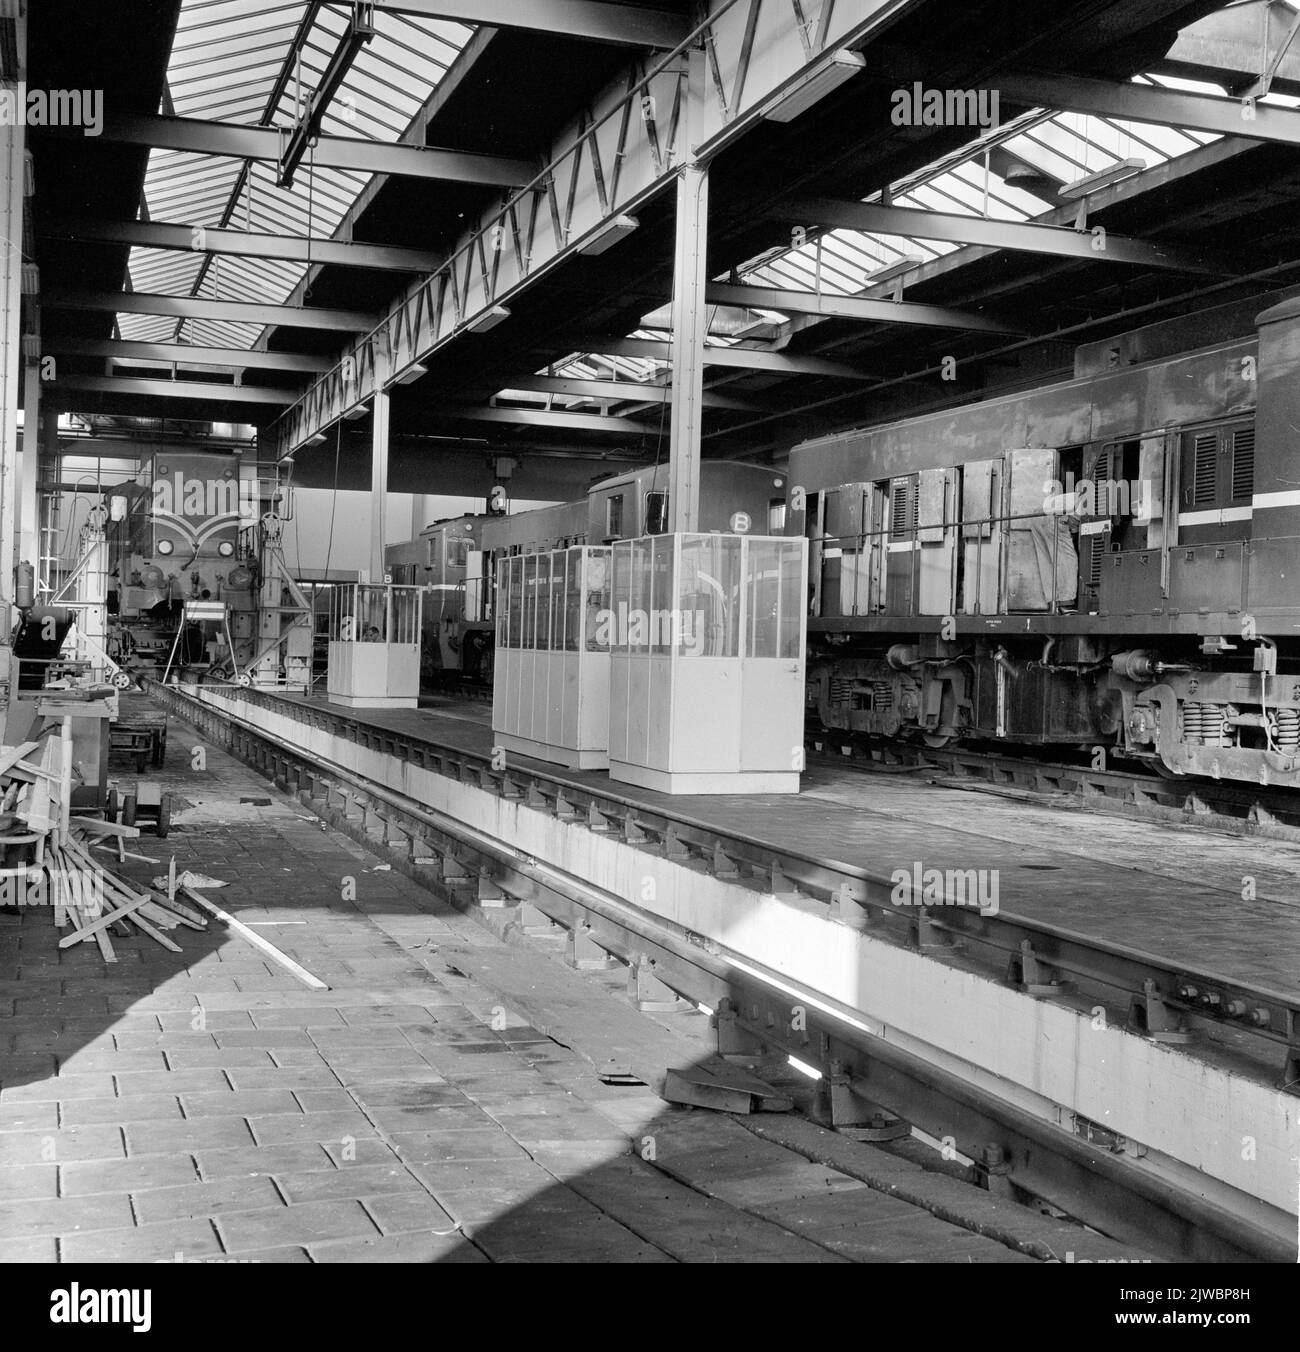 Interior of the Lijnwerkplaats Watergraafsmeer of the N.S. in Amsterdam with a number of diesel-electric locomotives from the 2200/2300 series of the N.S. Stock Photo